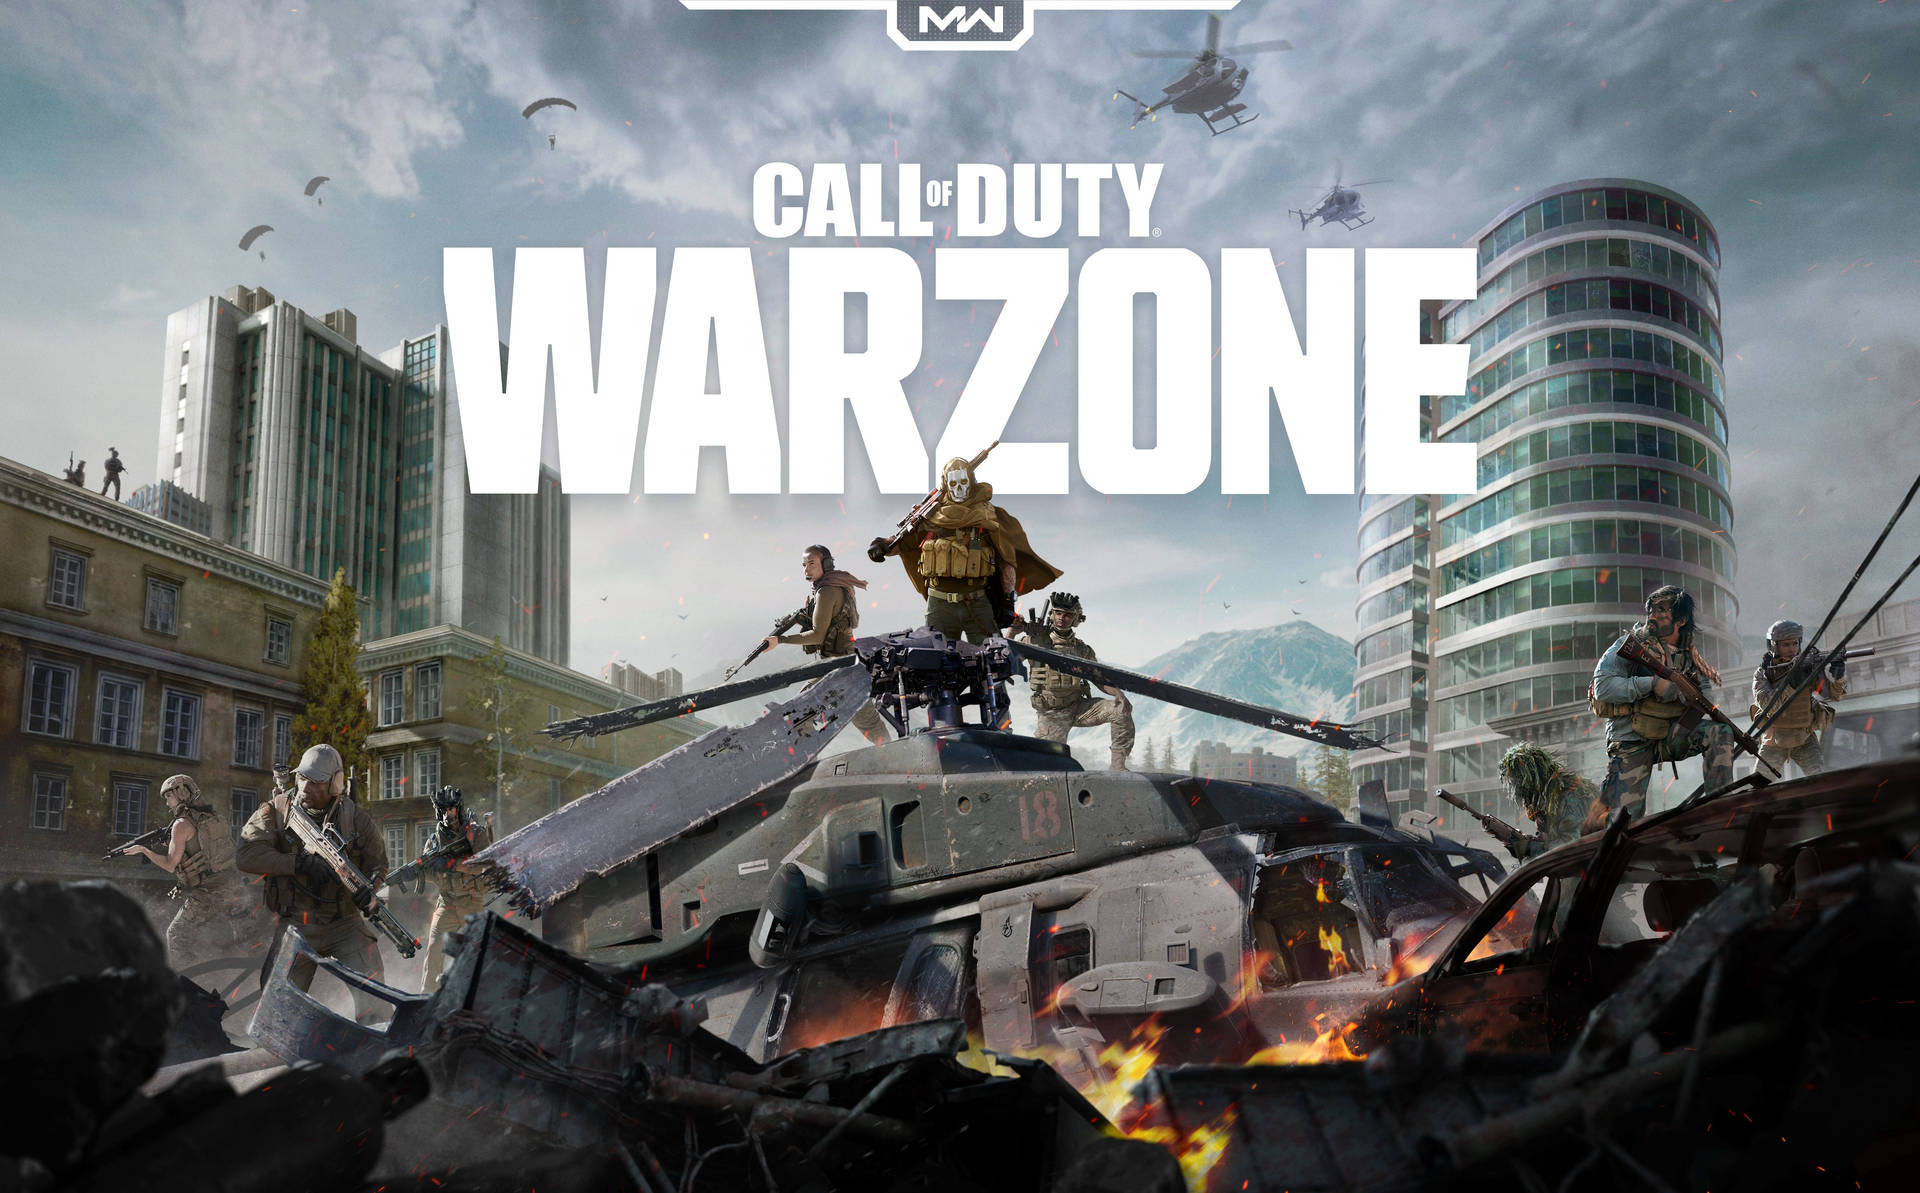 Call Of Duty Warzone 4k Crashed Helicopter